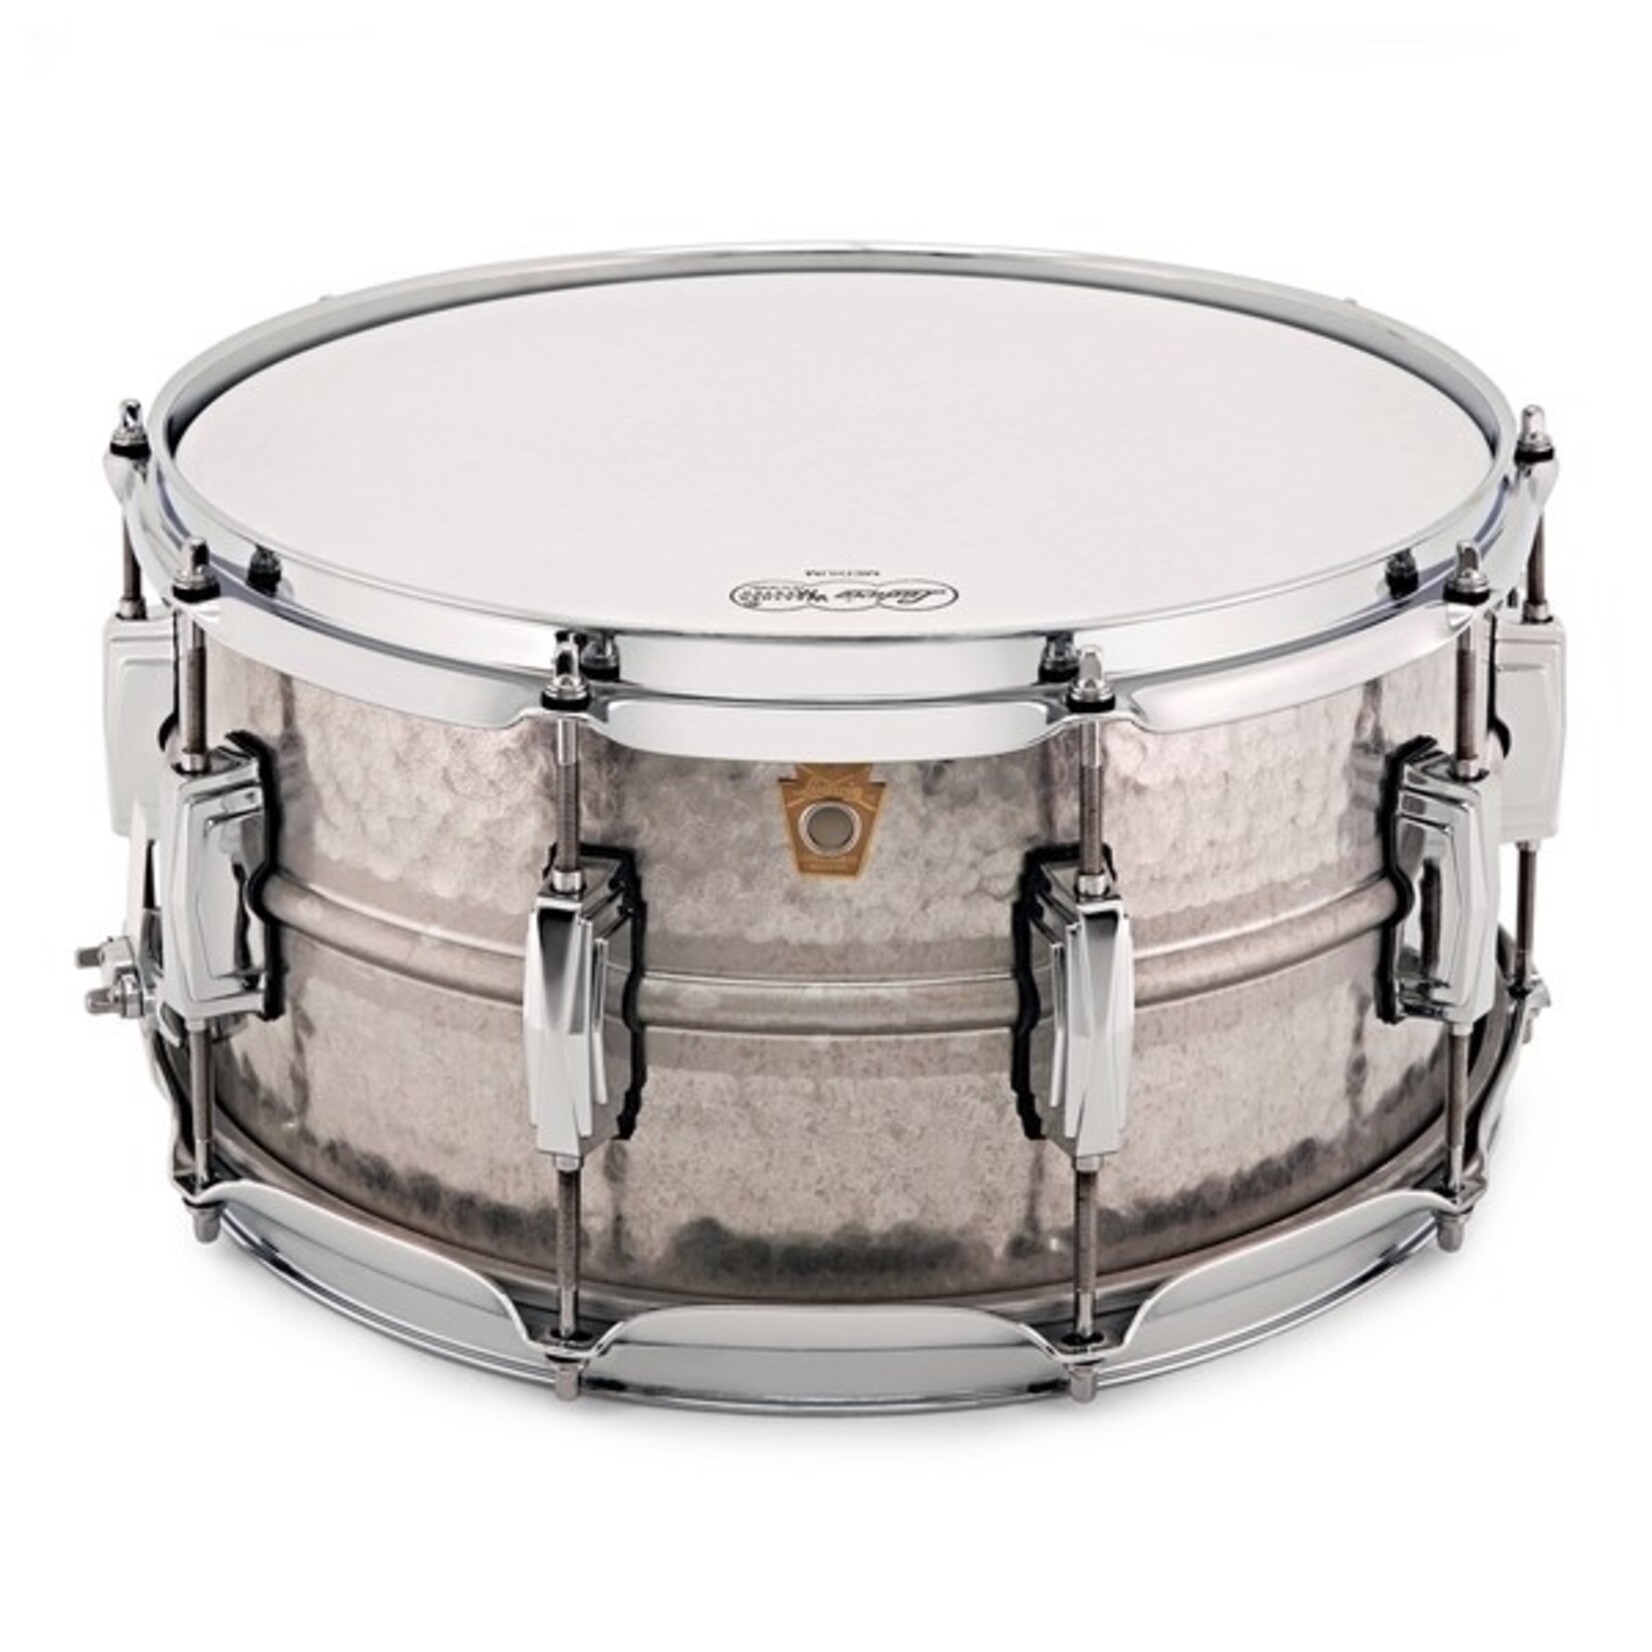 Ludwig Ludwig 6.5x14 Acrophonic Snare Drum, Hammered Shell, Imperial Lugs